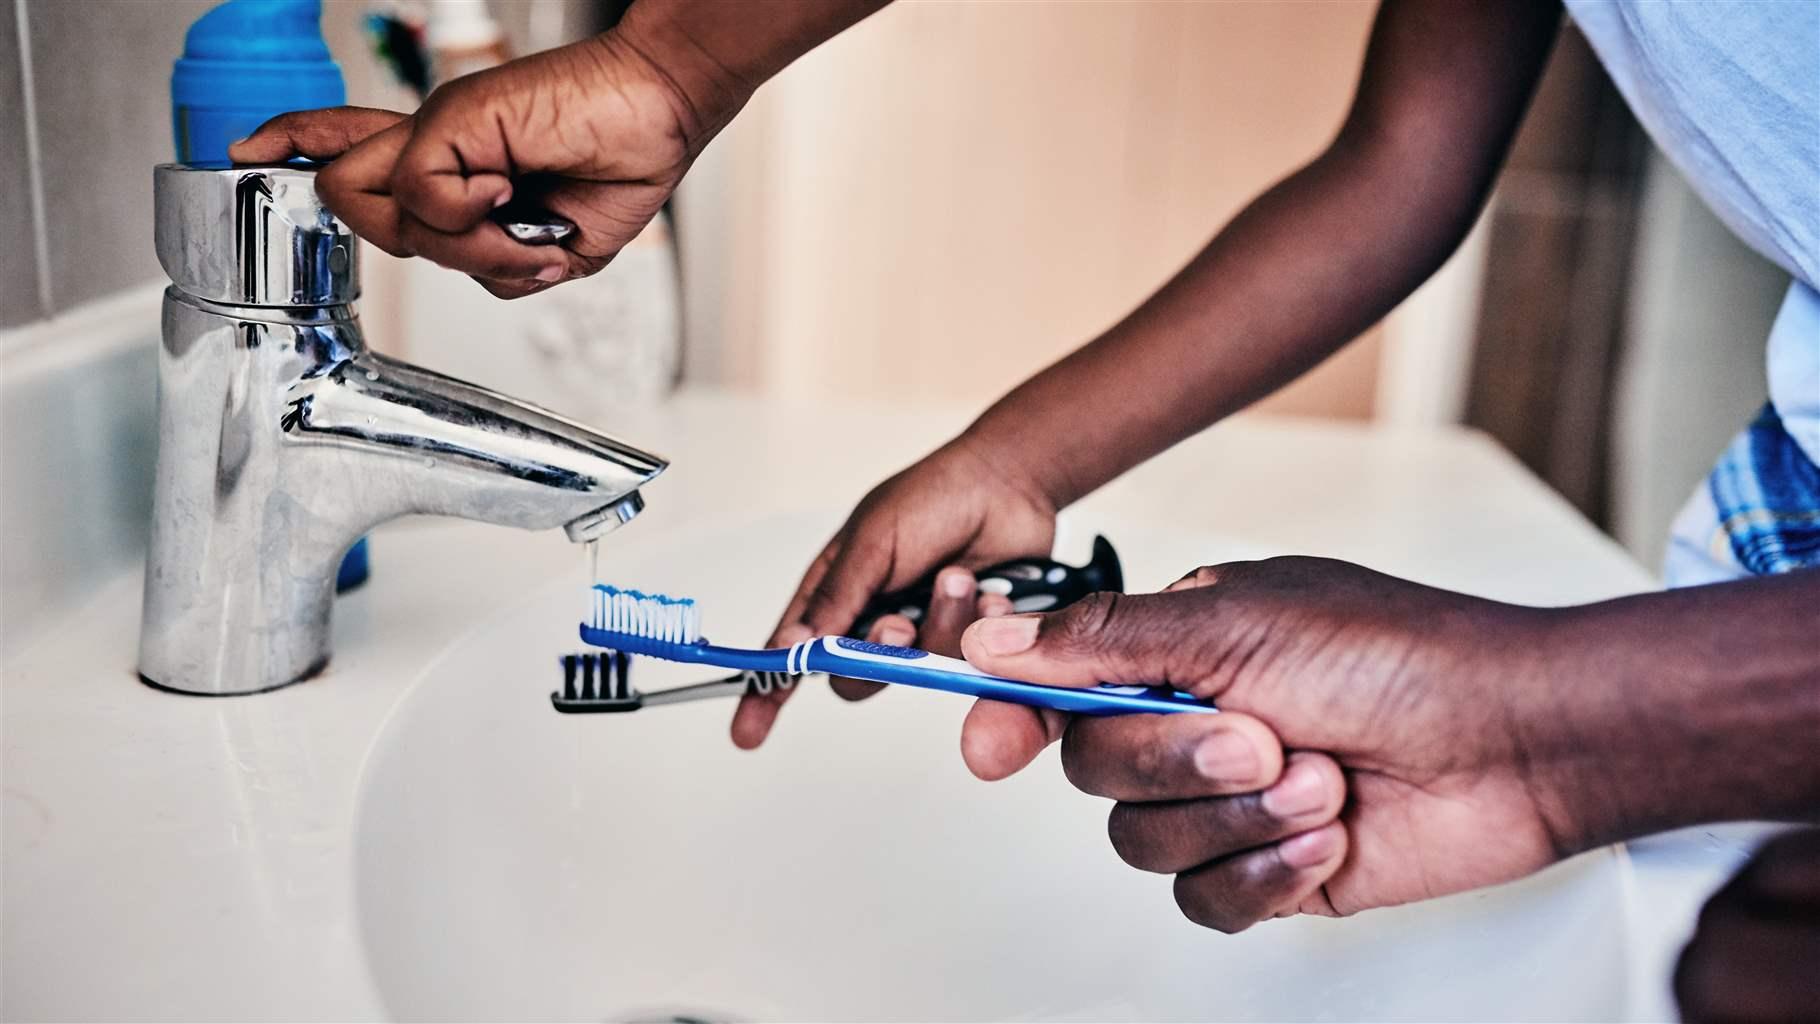 Man and son rinsing toothbrushes